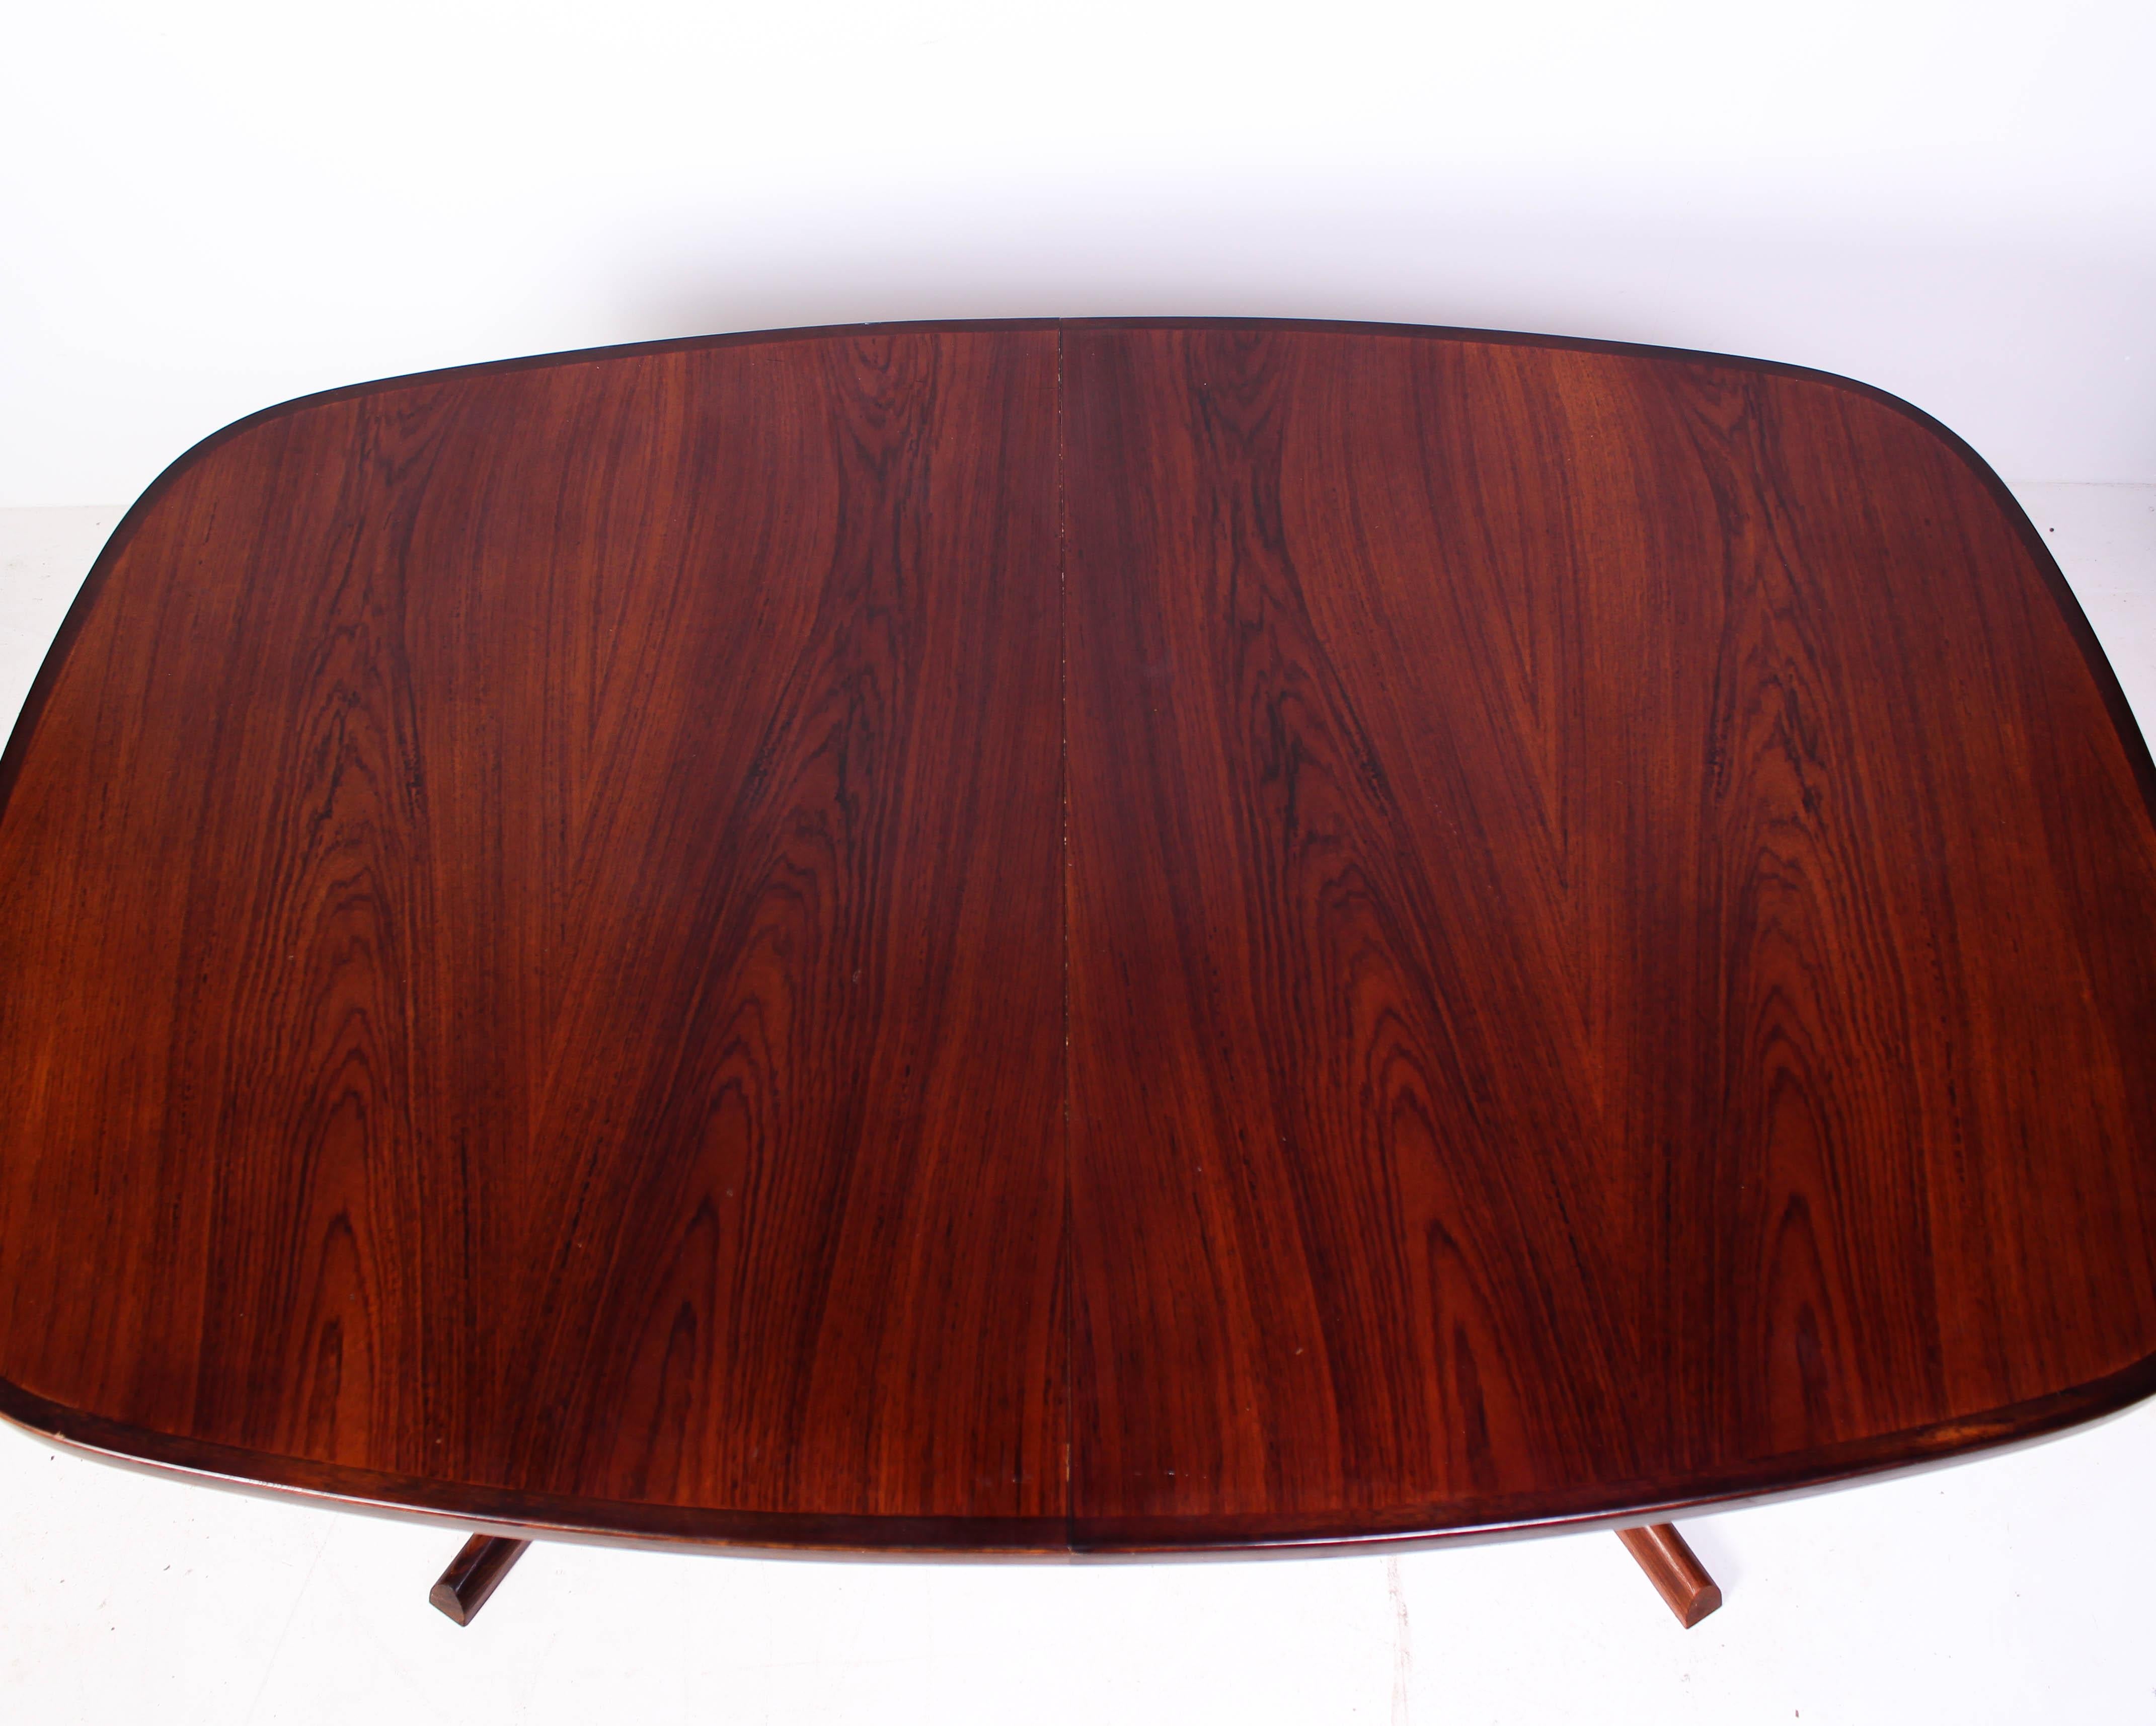 Midcentury rosewood dining table attributed to Danish designer Niels Otto Møller and produced by Gudme Möbelfabrik. The table is in good vintage condition with signs of usage consistent with age and use (especially on the edges of the table where